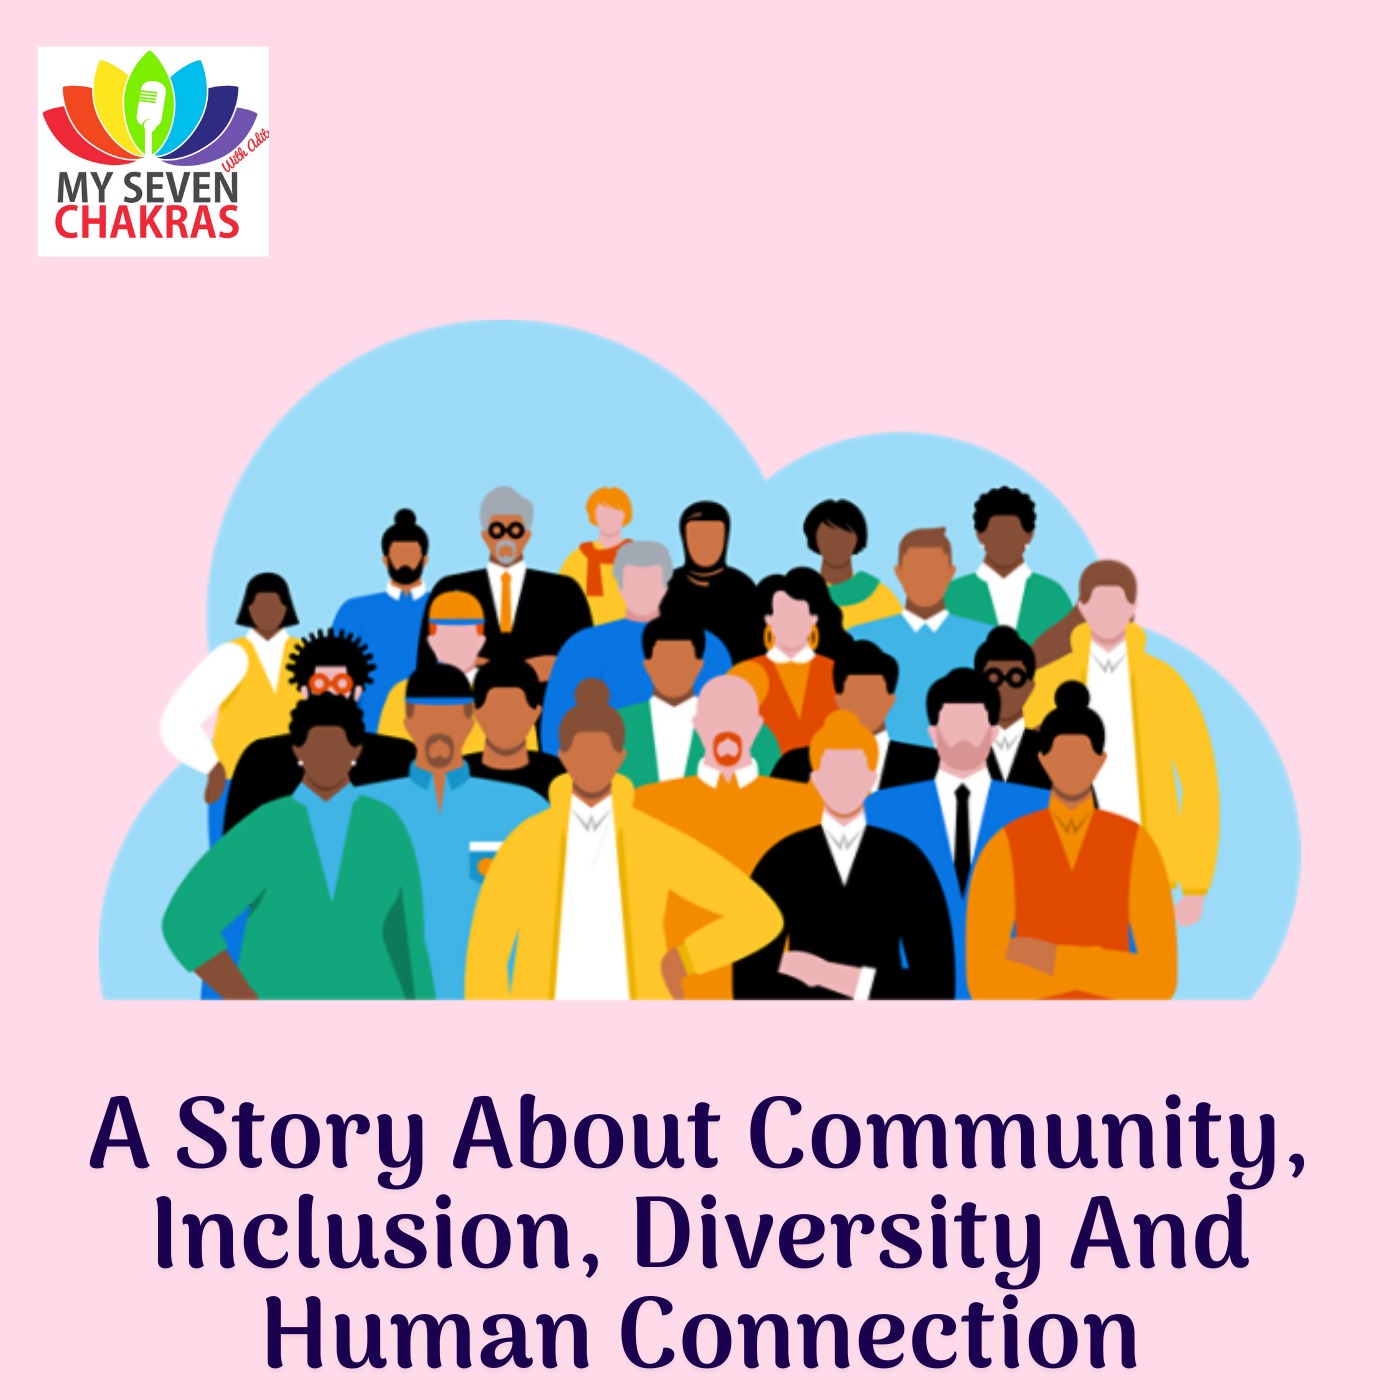 A Story About Community, Inclusion, Diversity And Human Connection